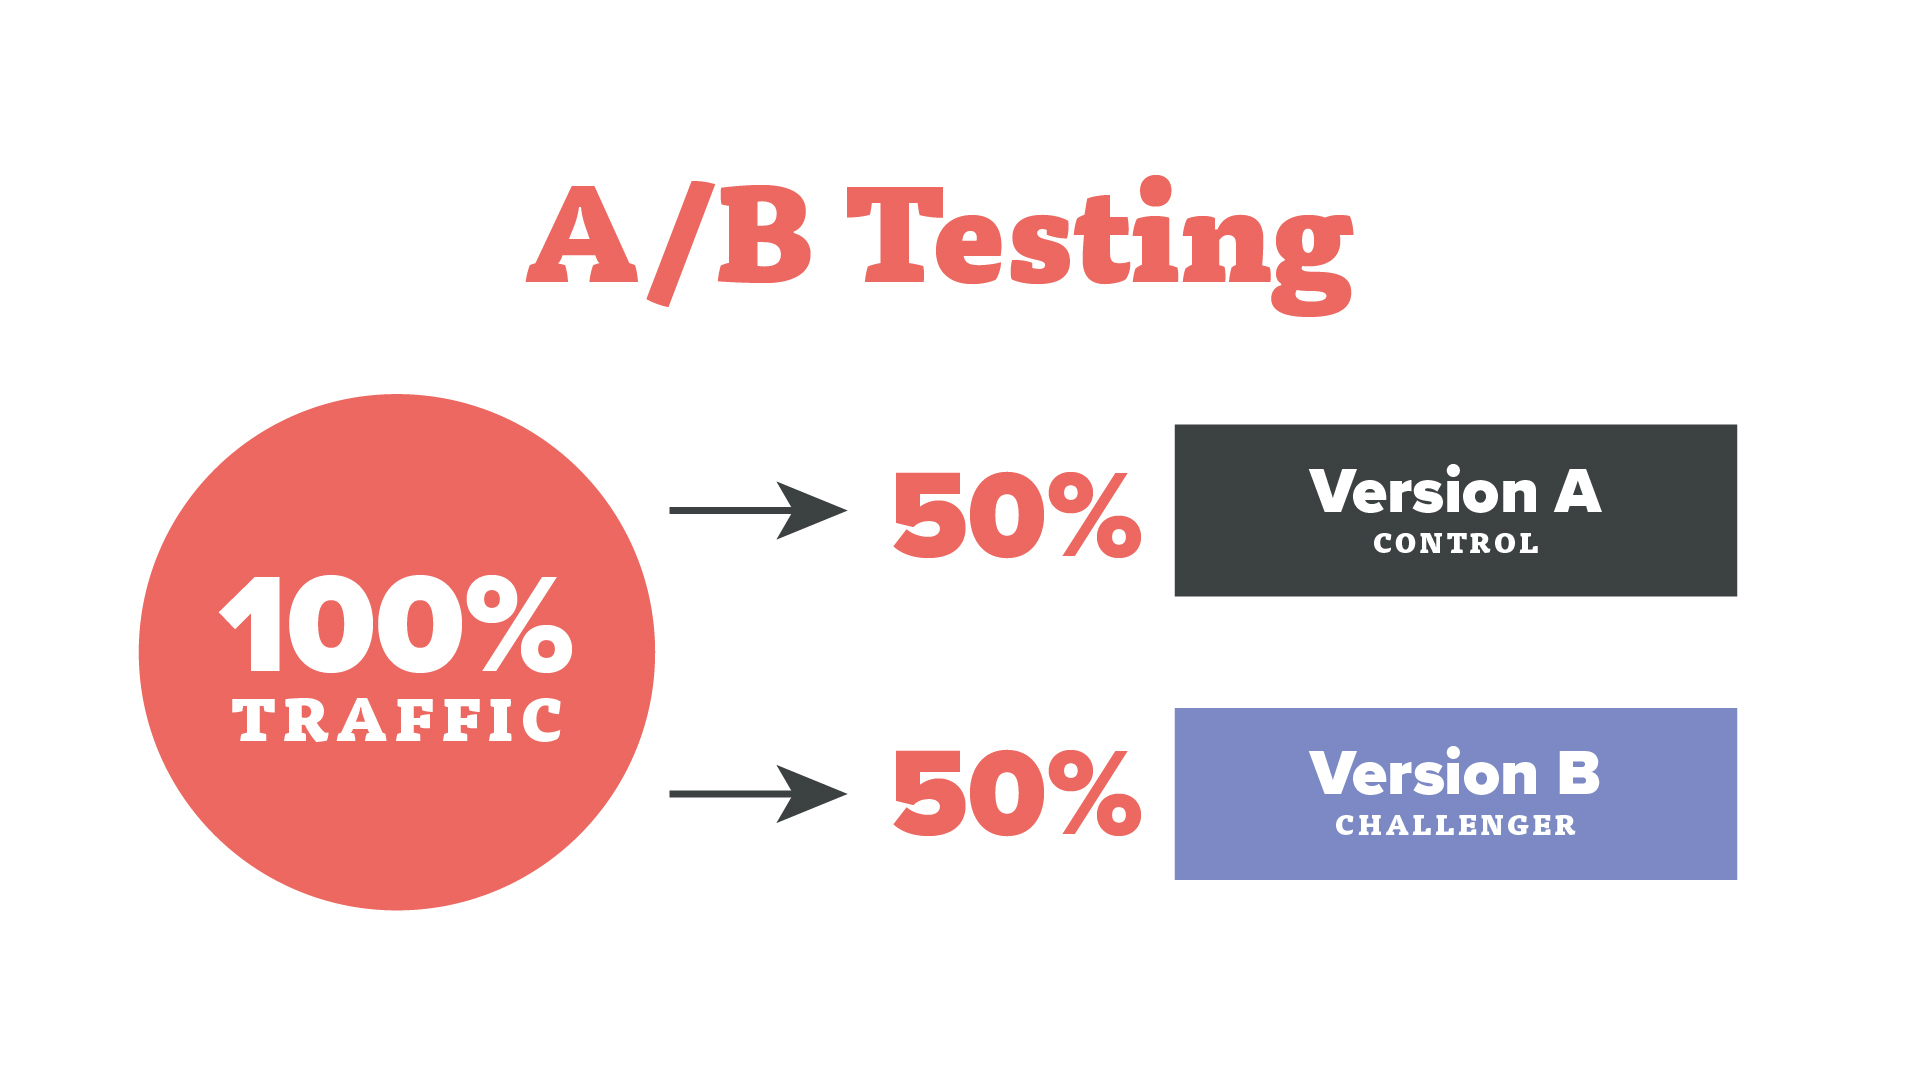 Graphic of 100% of website being split 50/50 between version A (control) and version B (challenger)